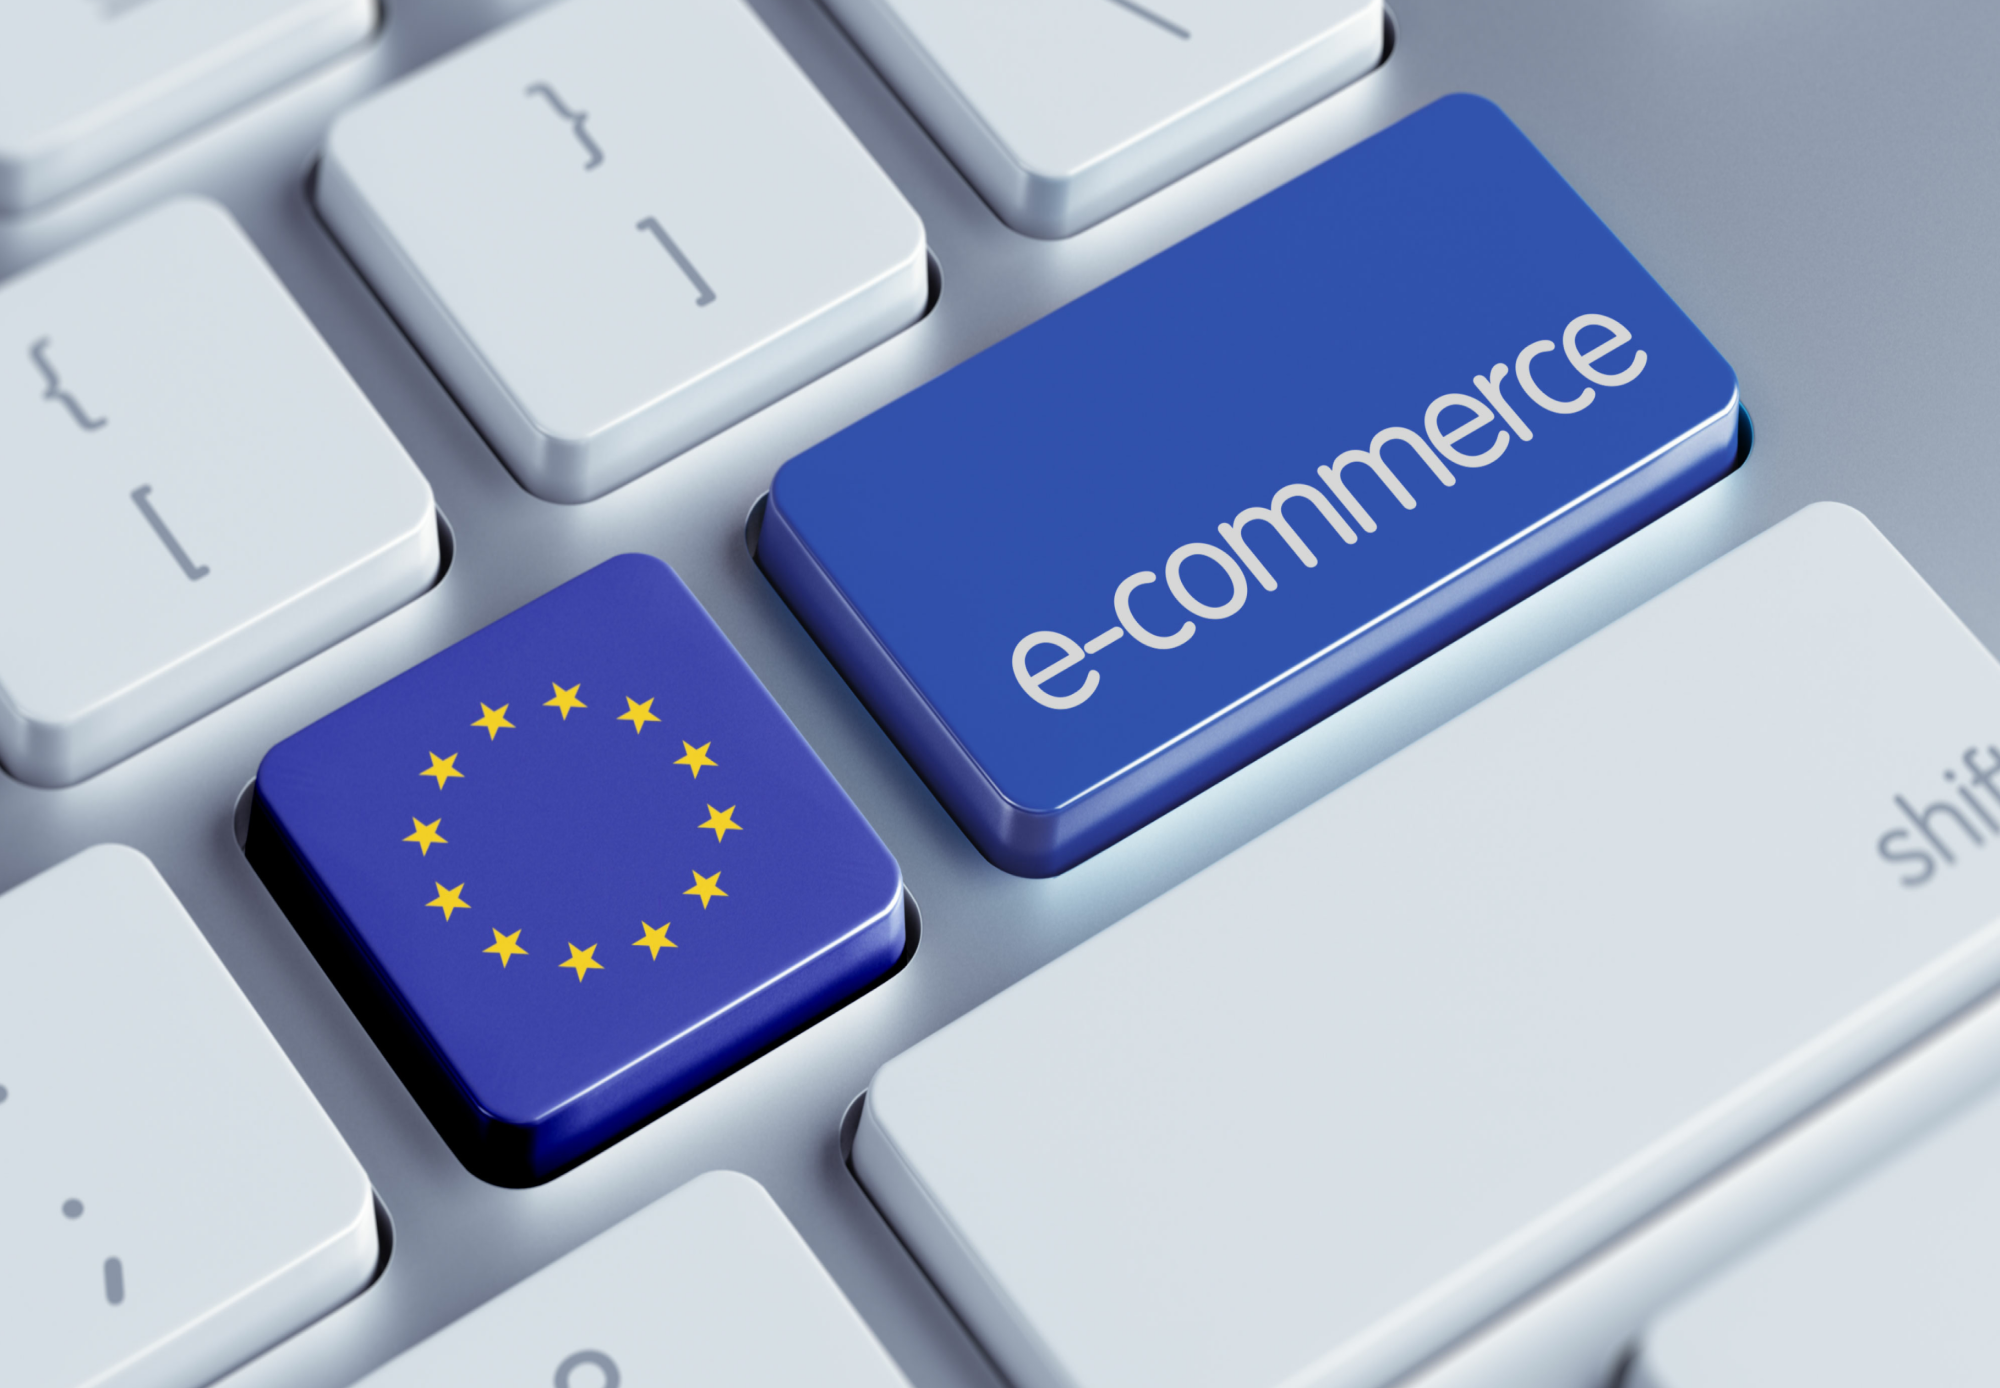 Sustainable, digital, and inclusive: Ecommerce Europe's Manifesto defines the next chapter for European сommerce